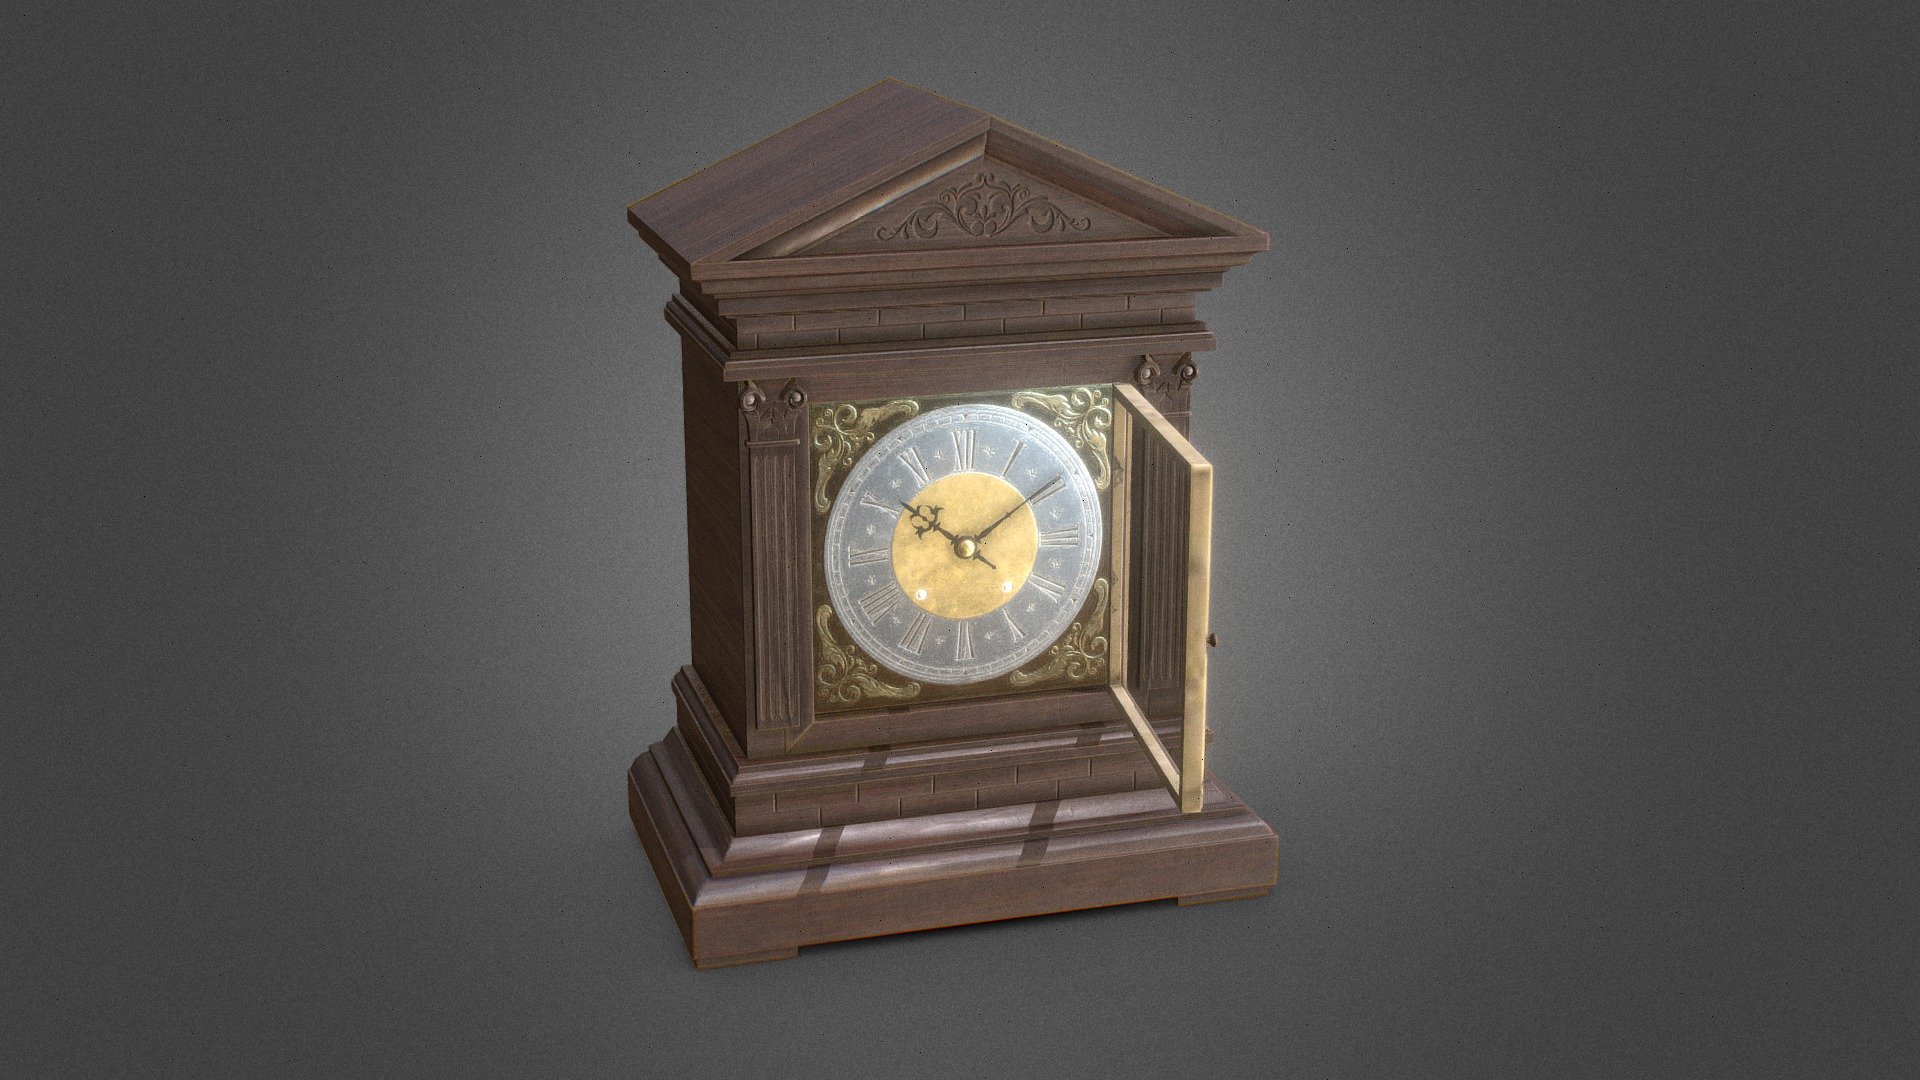 A game-ready antique mantel clock created for a personal project. It would make a great addition to an old Victorian scene. Suitable for use in game, VR, AR and archviz.




low-poly

6k triangle FBX

2k textures

Modelled in Blender and textured in Substance Painter.

Free to download 3d model